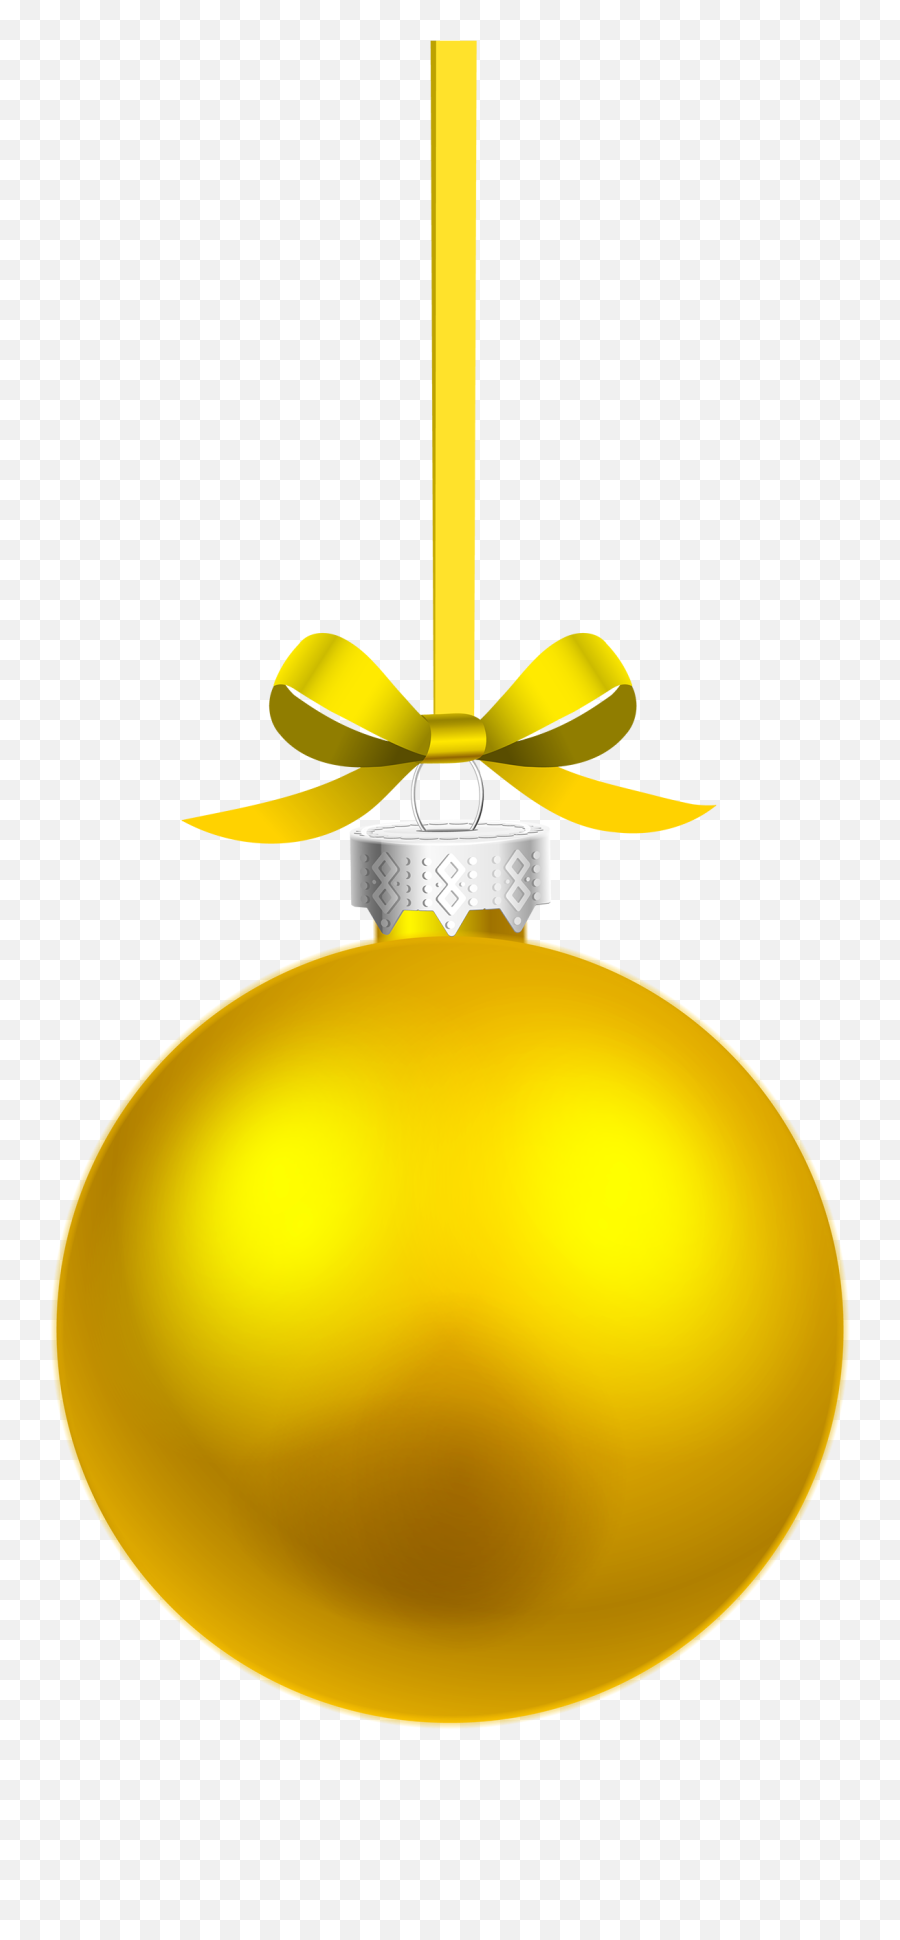 Yellow Christmas Ornaments Vector Png 46356 - Free Icons Yellow Christmas Ball Png,Ornaments Png